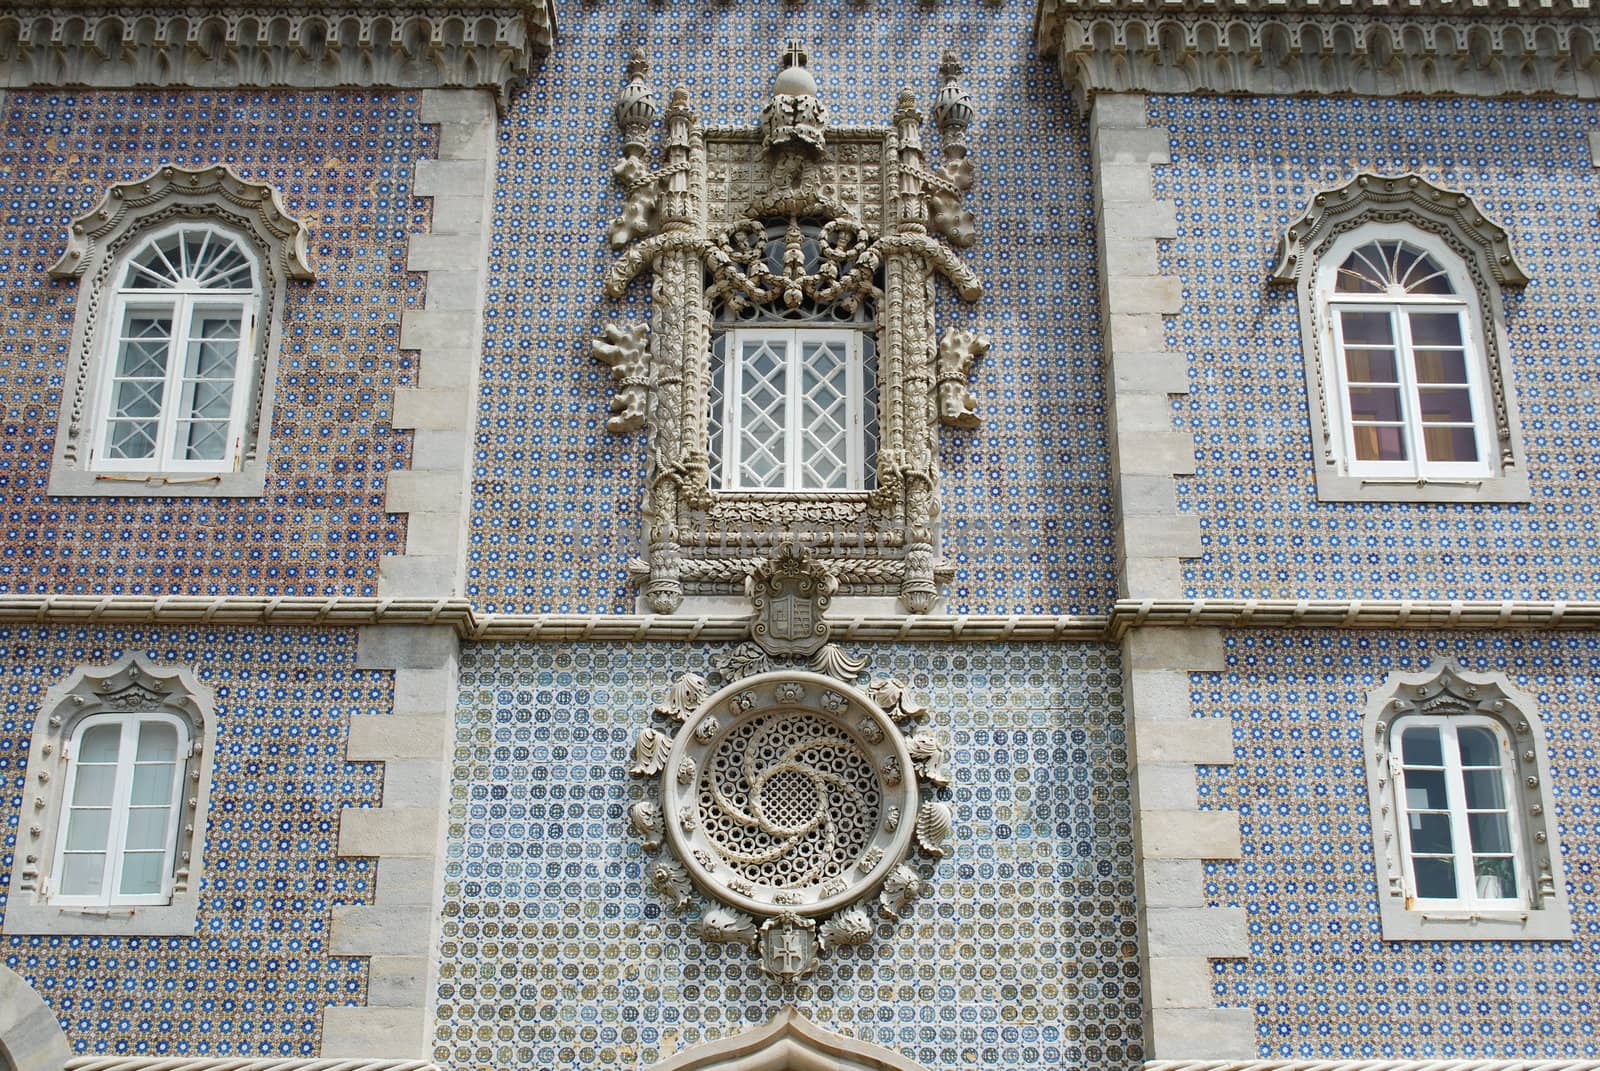 architectural details (windows and tiles) in Sintra, Portugal